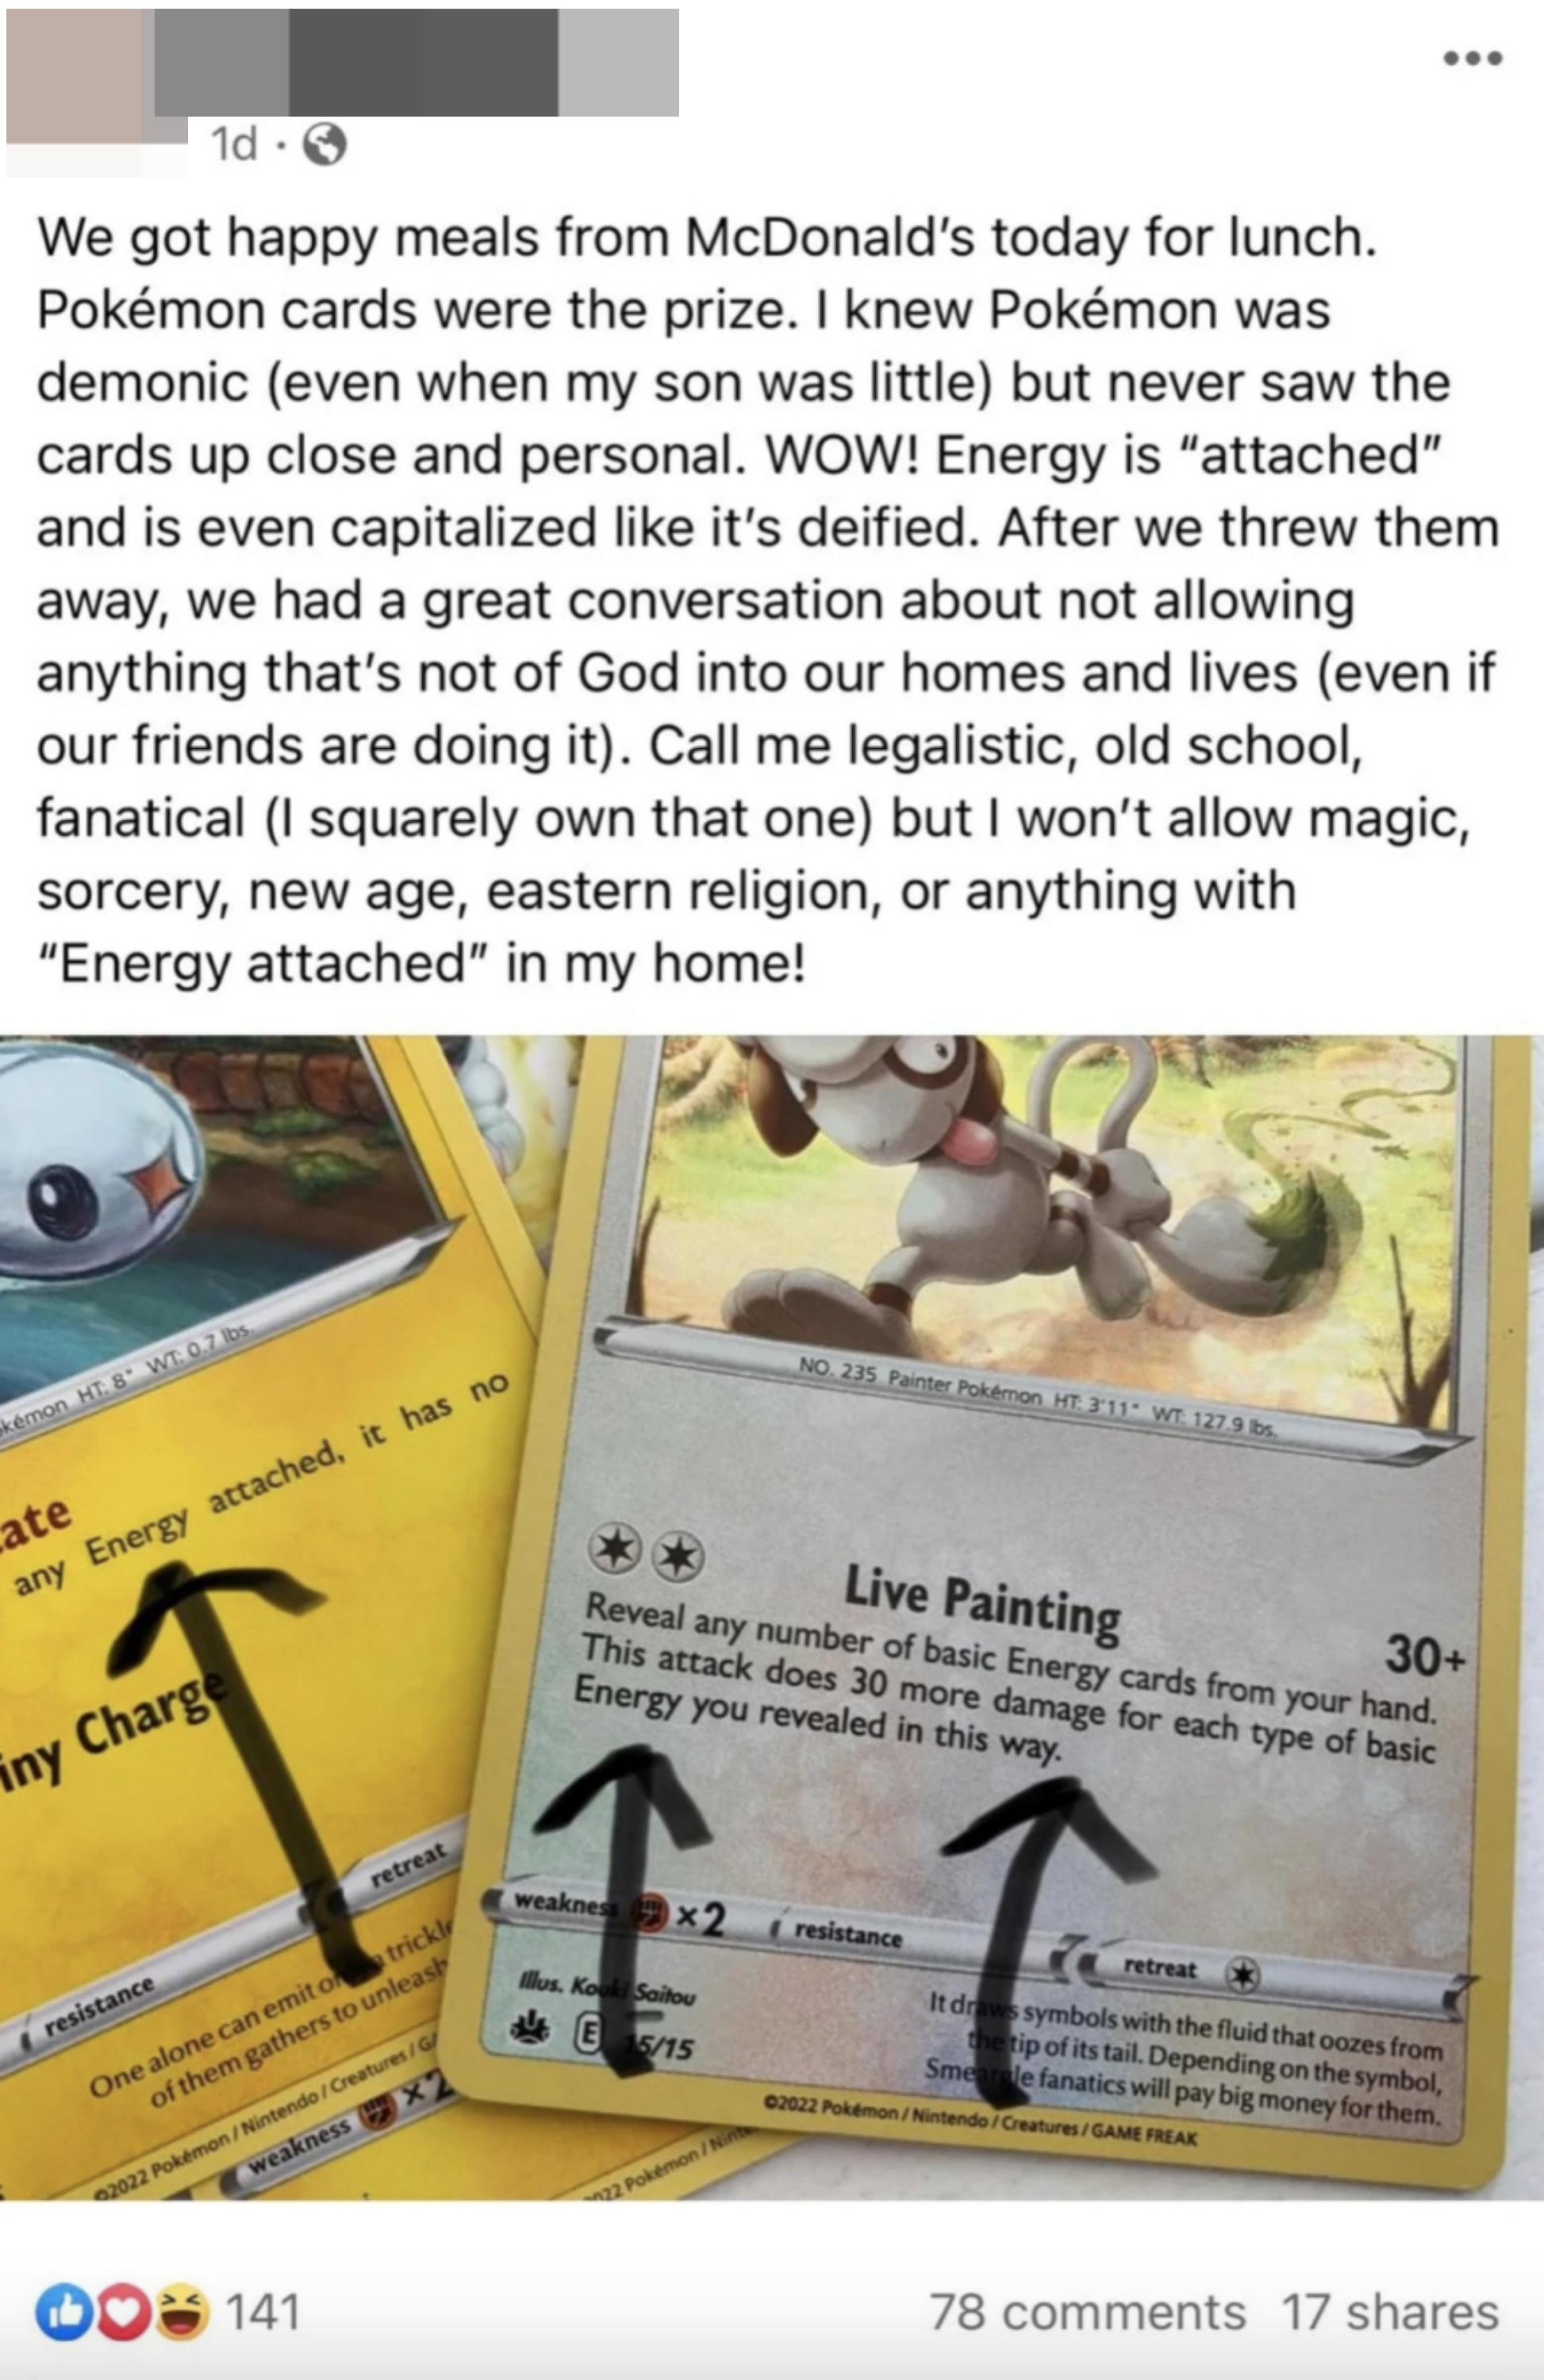 Person calls Pokémon cards from McDonald&#x27;s demonic because &quot;Energy&quot; is  attached and the word is capitalized, &quot;like it&#x27;s deified,&quot; so they talked to their son about not letting anything &quot;not of God into our homes and lives&quot;